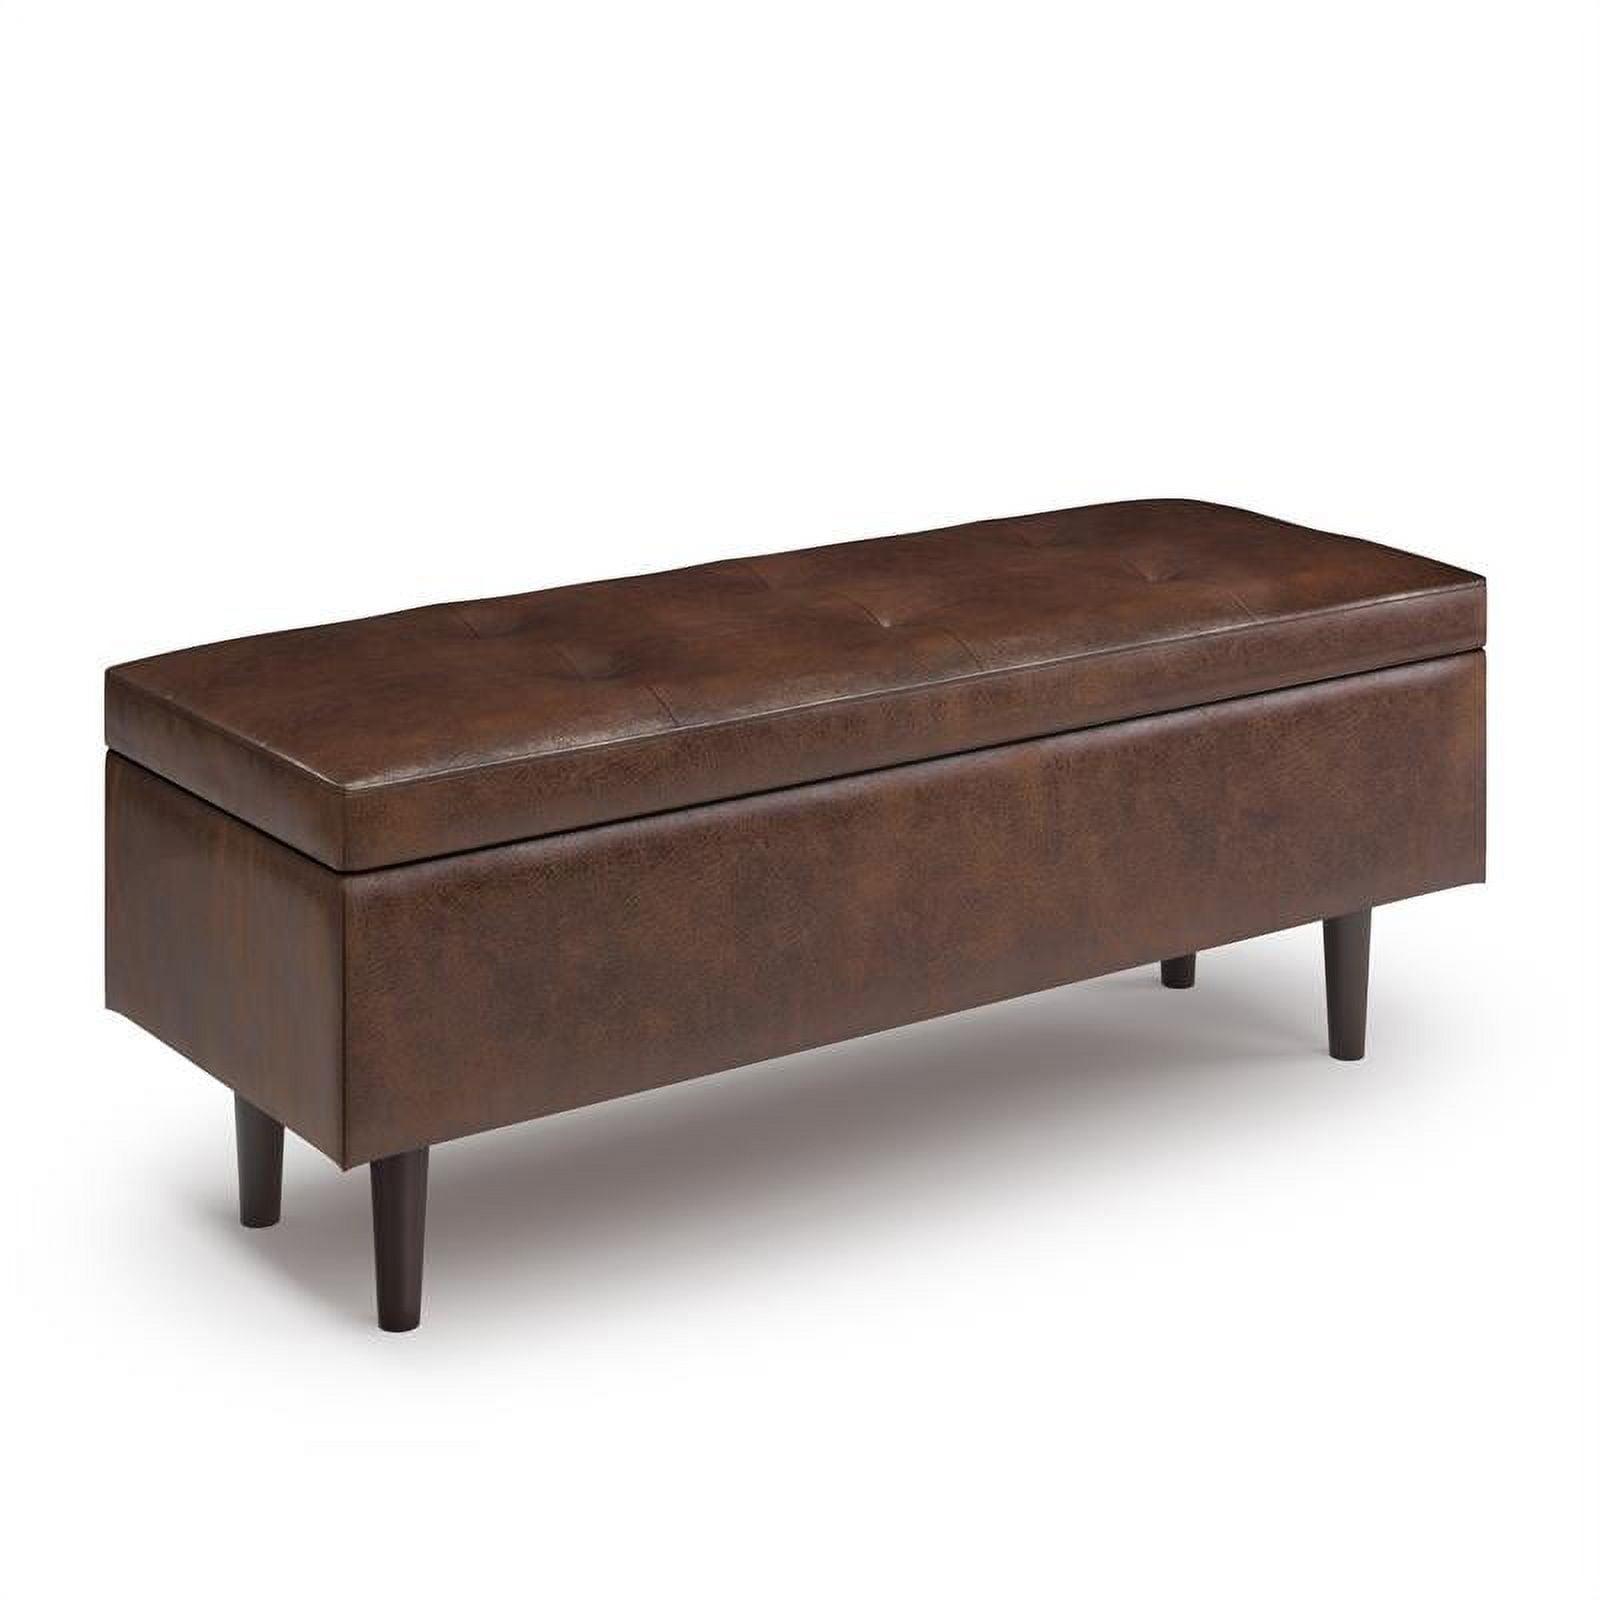 Shay Mid Century Distressed Chestnut Brown Faux Leather Storage Ottoman